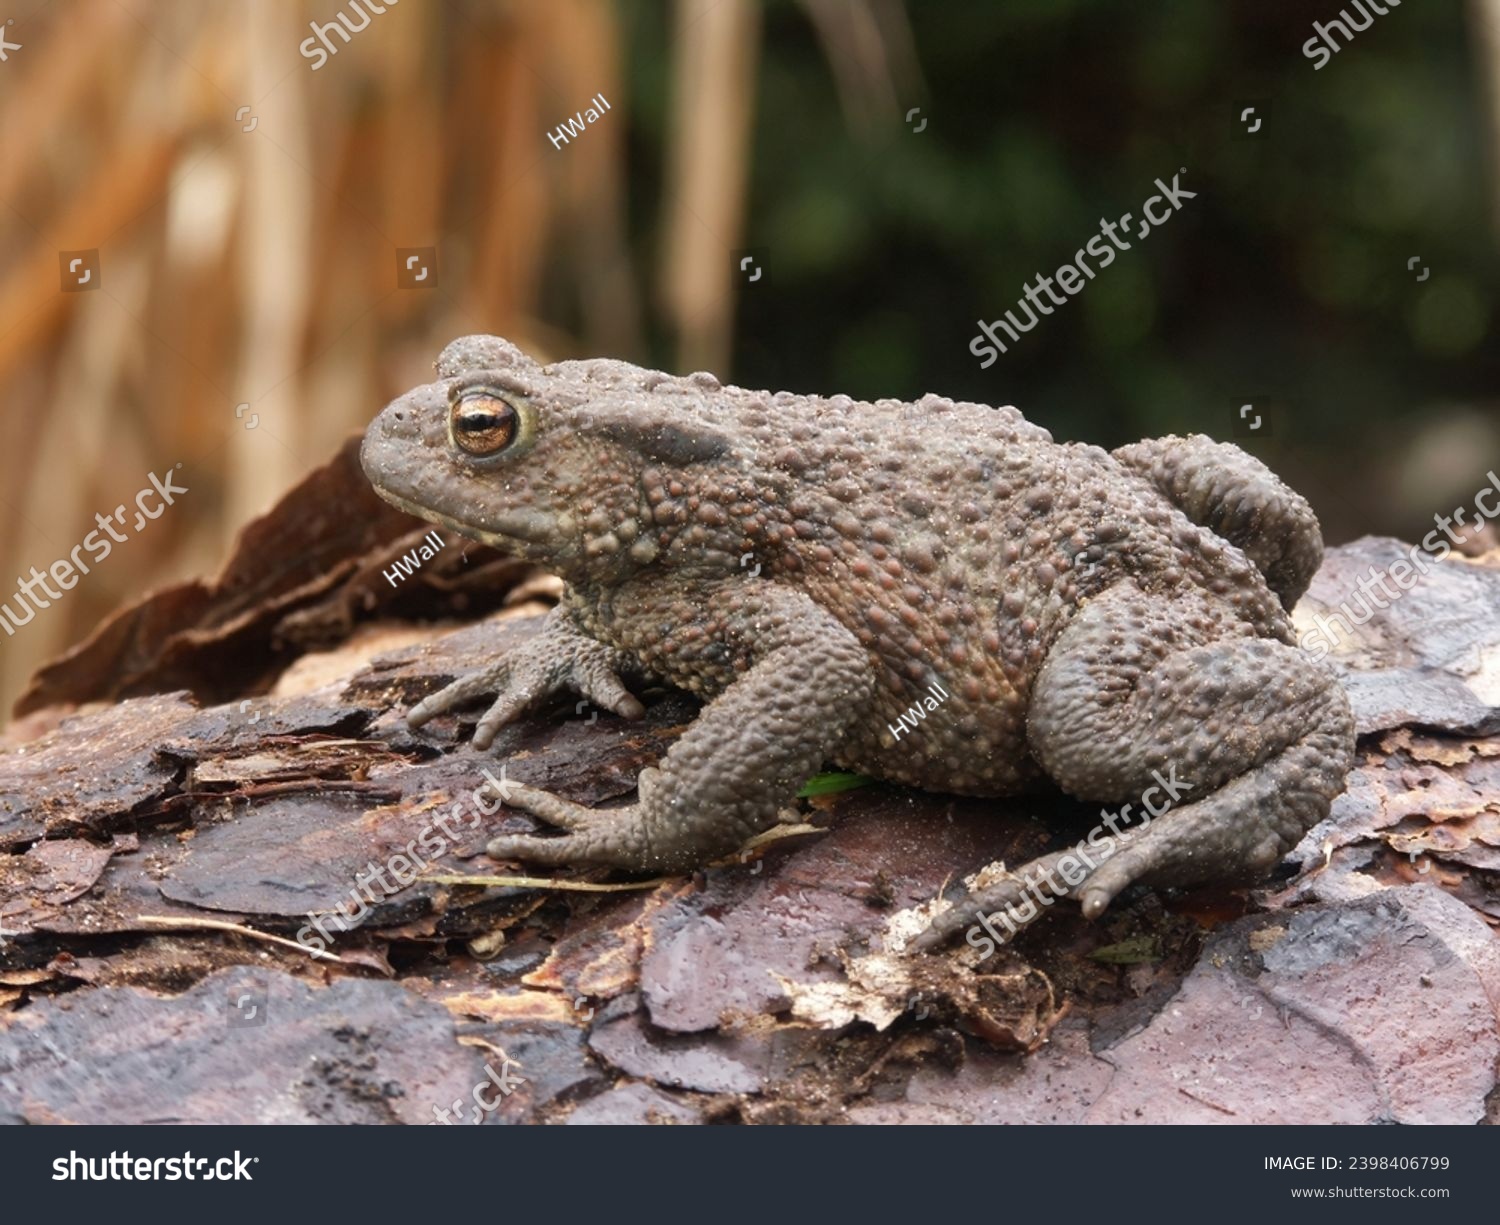 Natural closeup on a female Common European toad, Bufo bufo from the garden #2398406799